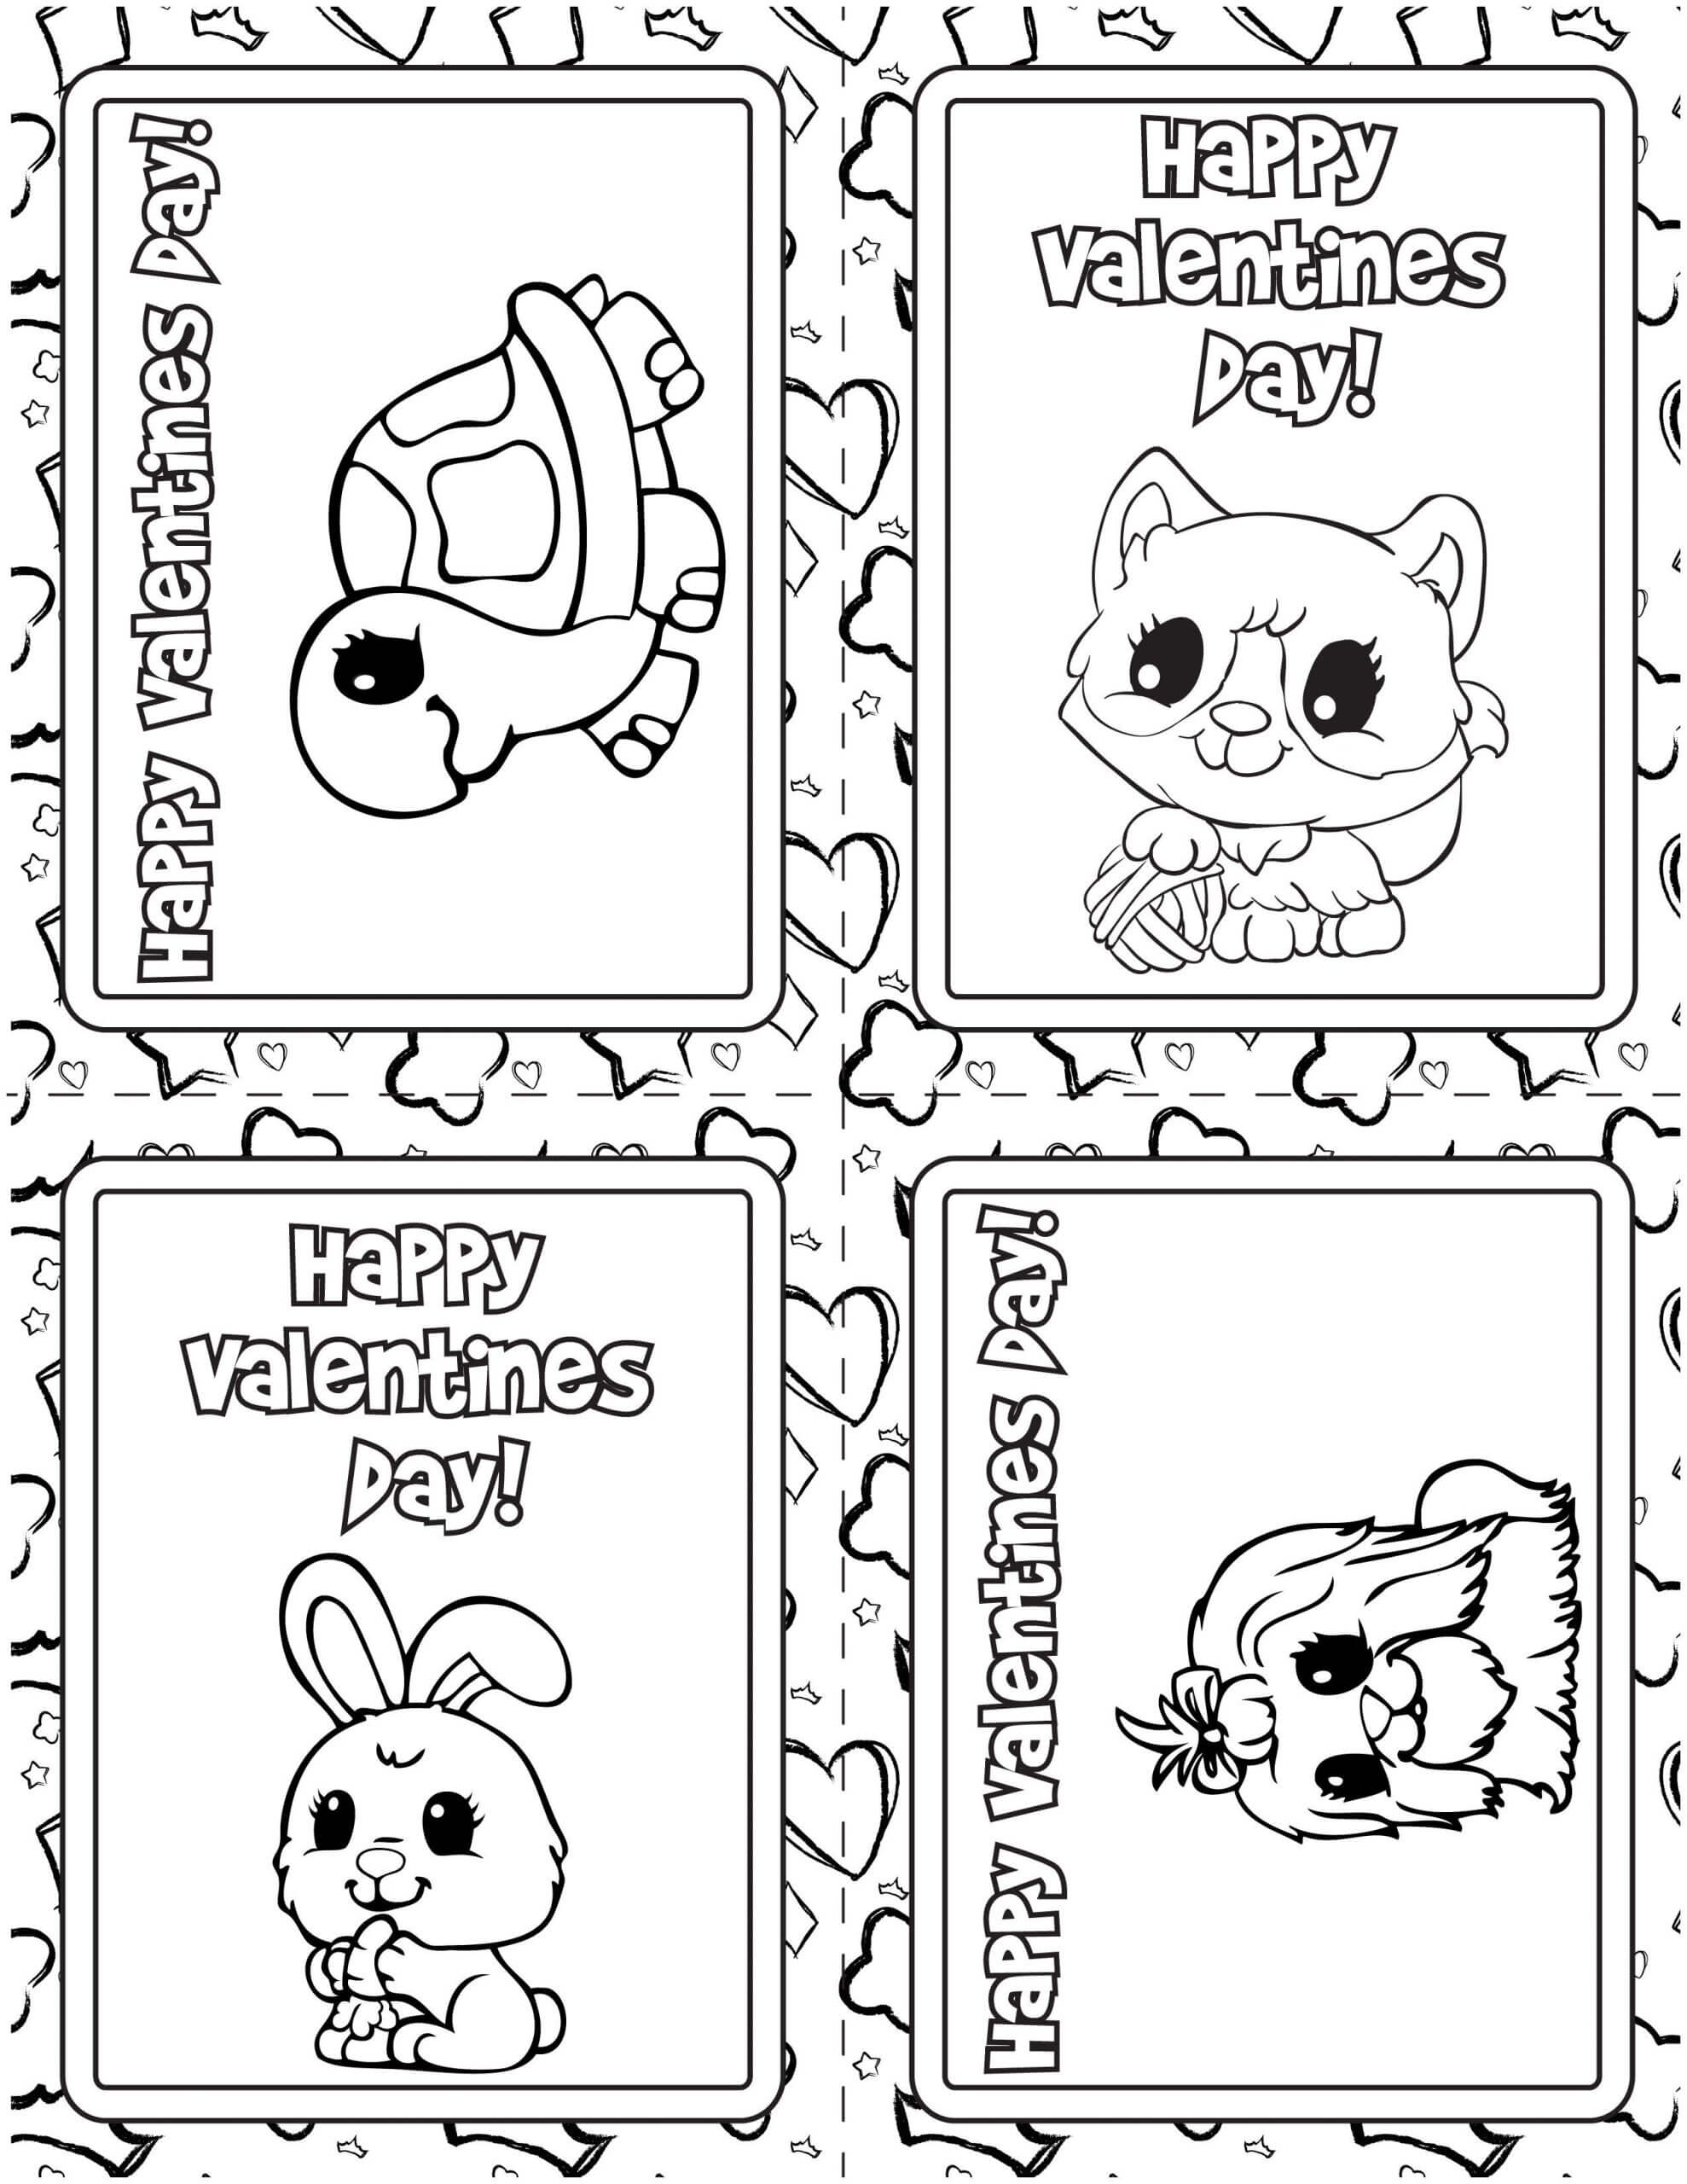 Coloring Pages : Coloringges Astonishing Valentines Day Within Valentine Card Template For Kids